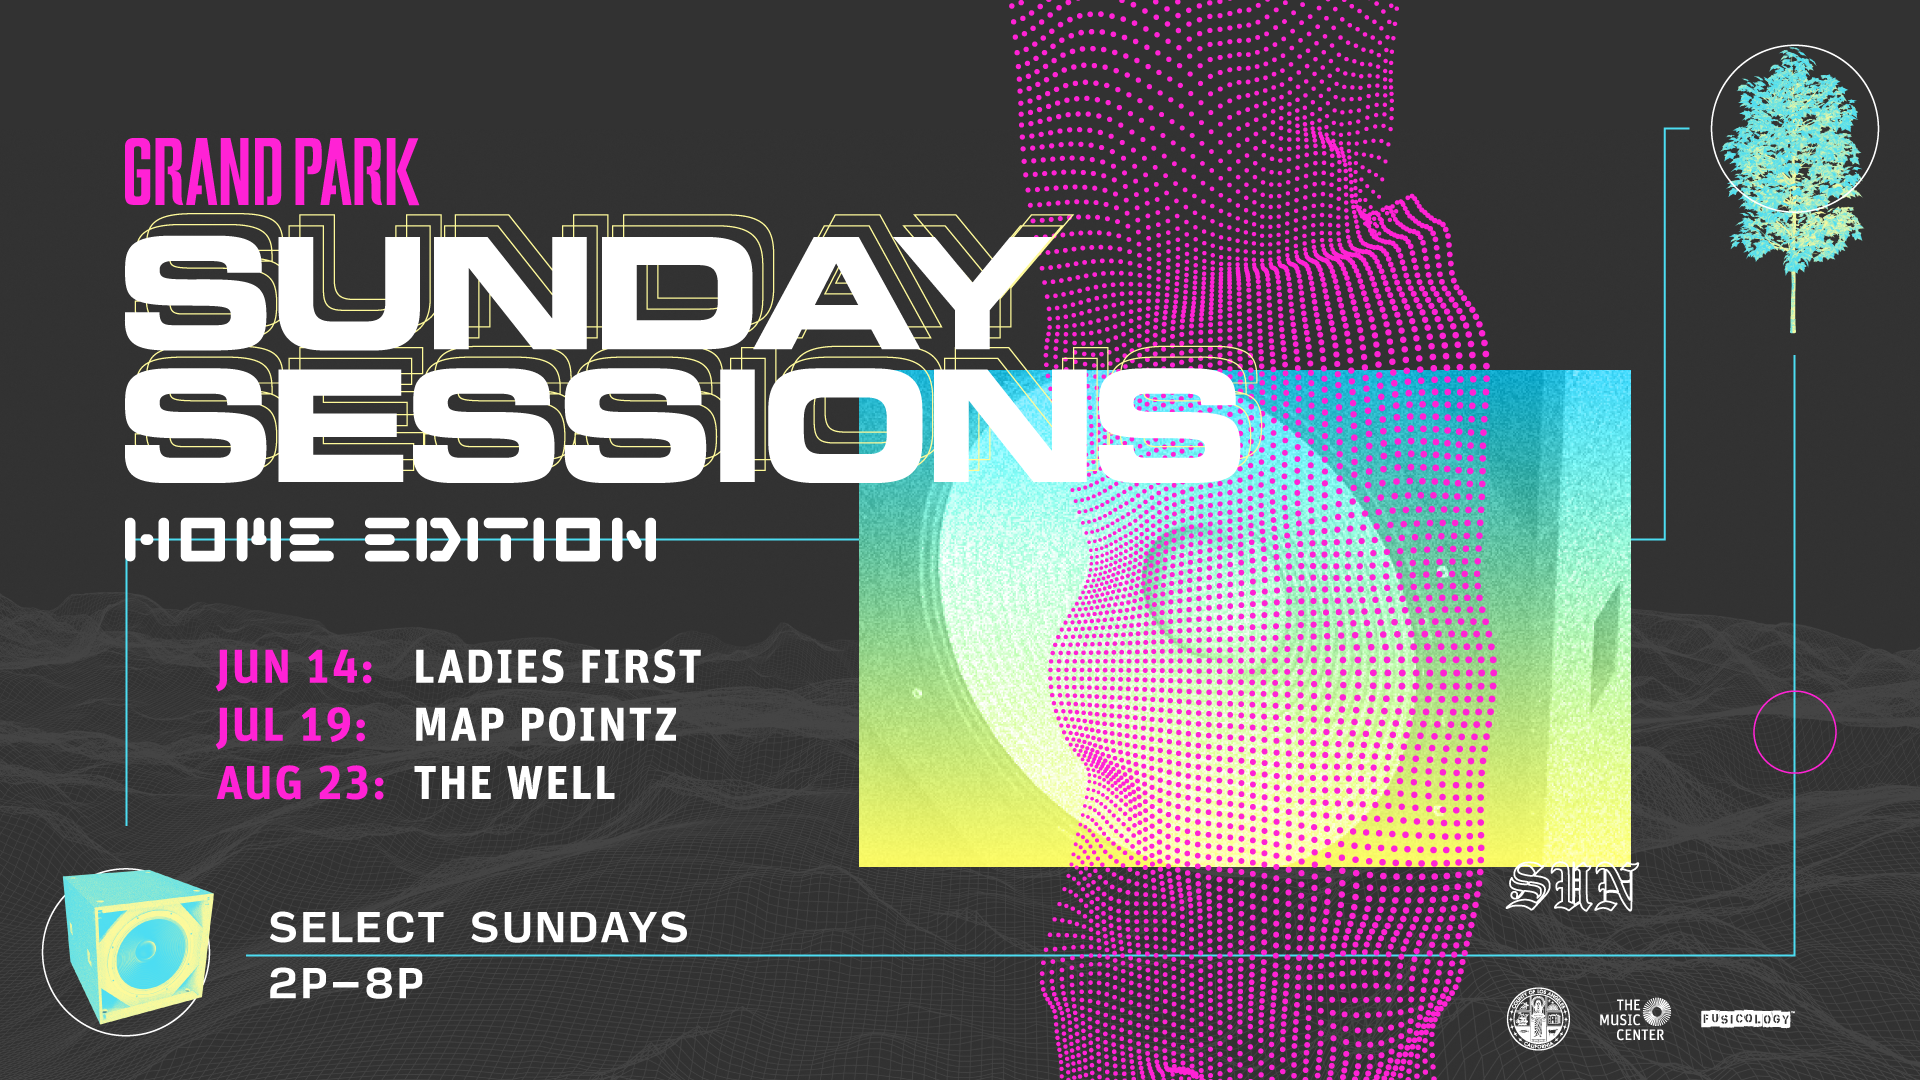 GRAND PARK PRESENTS SUNDAY SESSIONS HOME EDITION 2020 @ Grand Park digital platforms | Los Angeles | California | United States